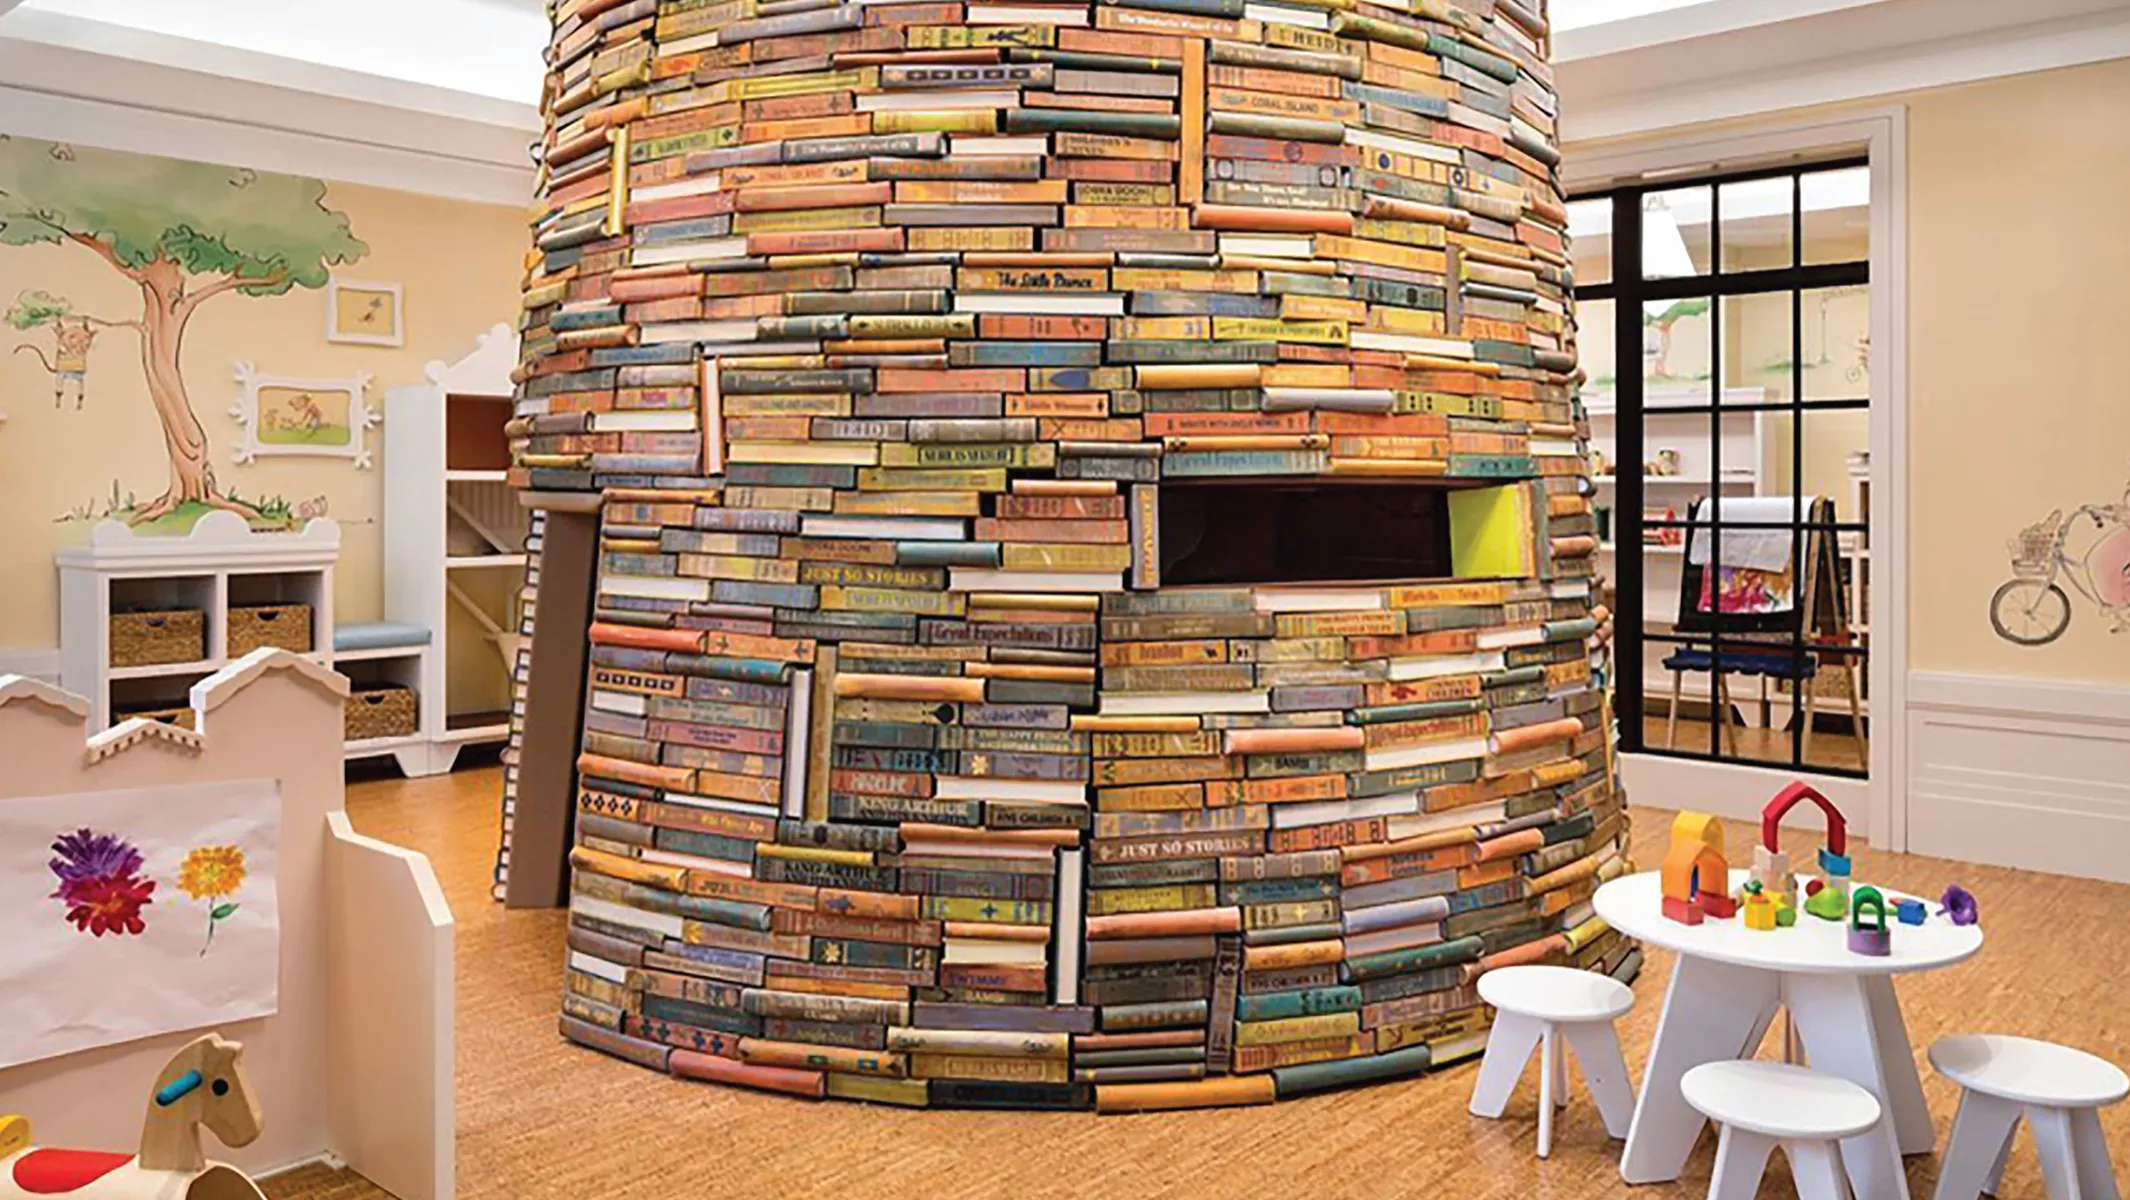 Children's play area with large fort constructed of books